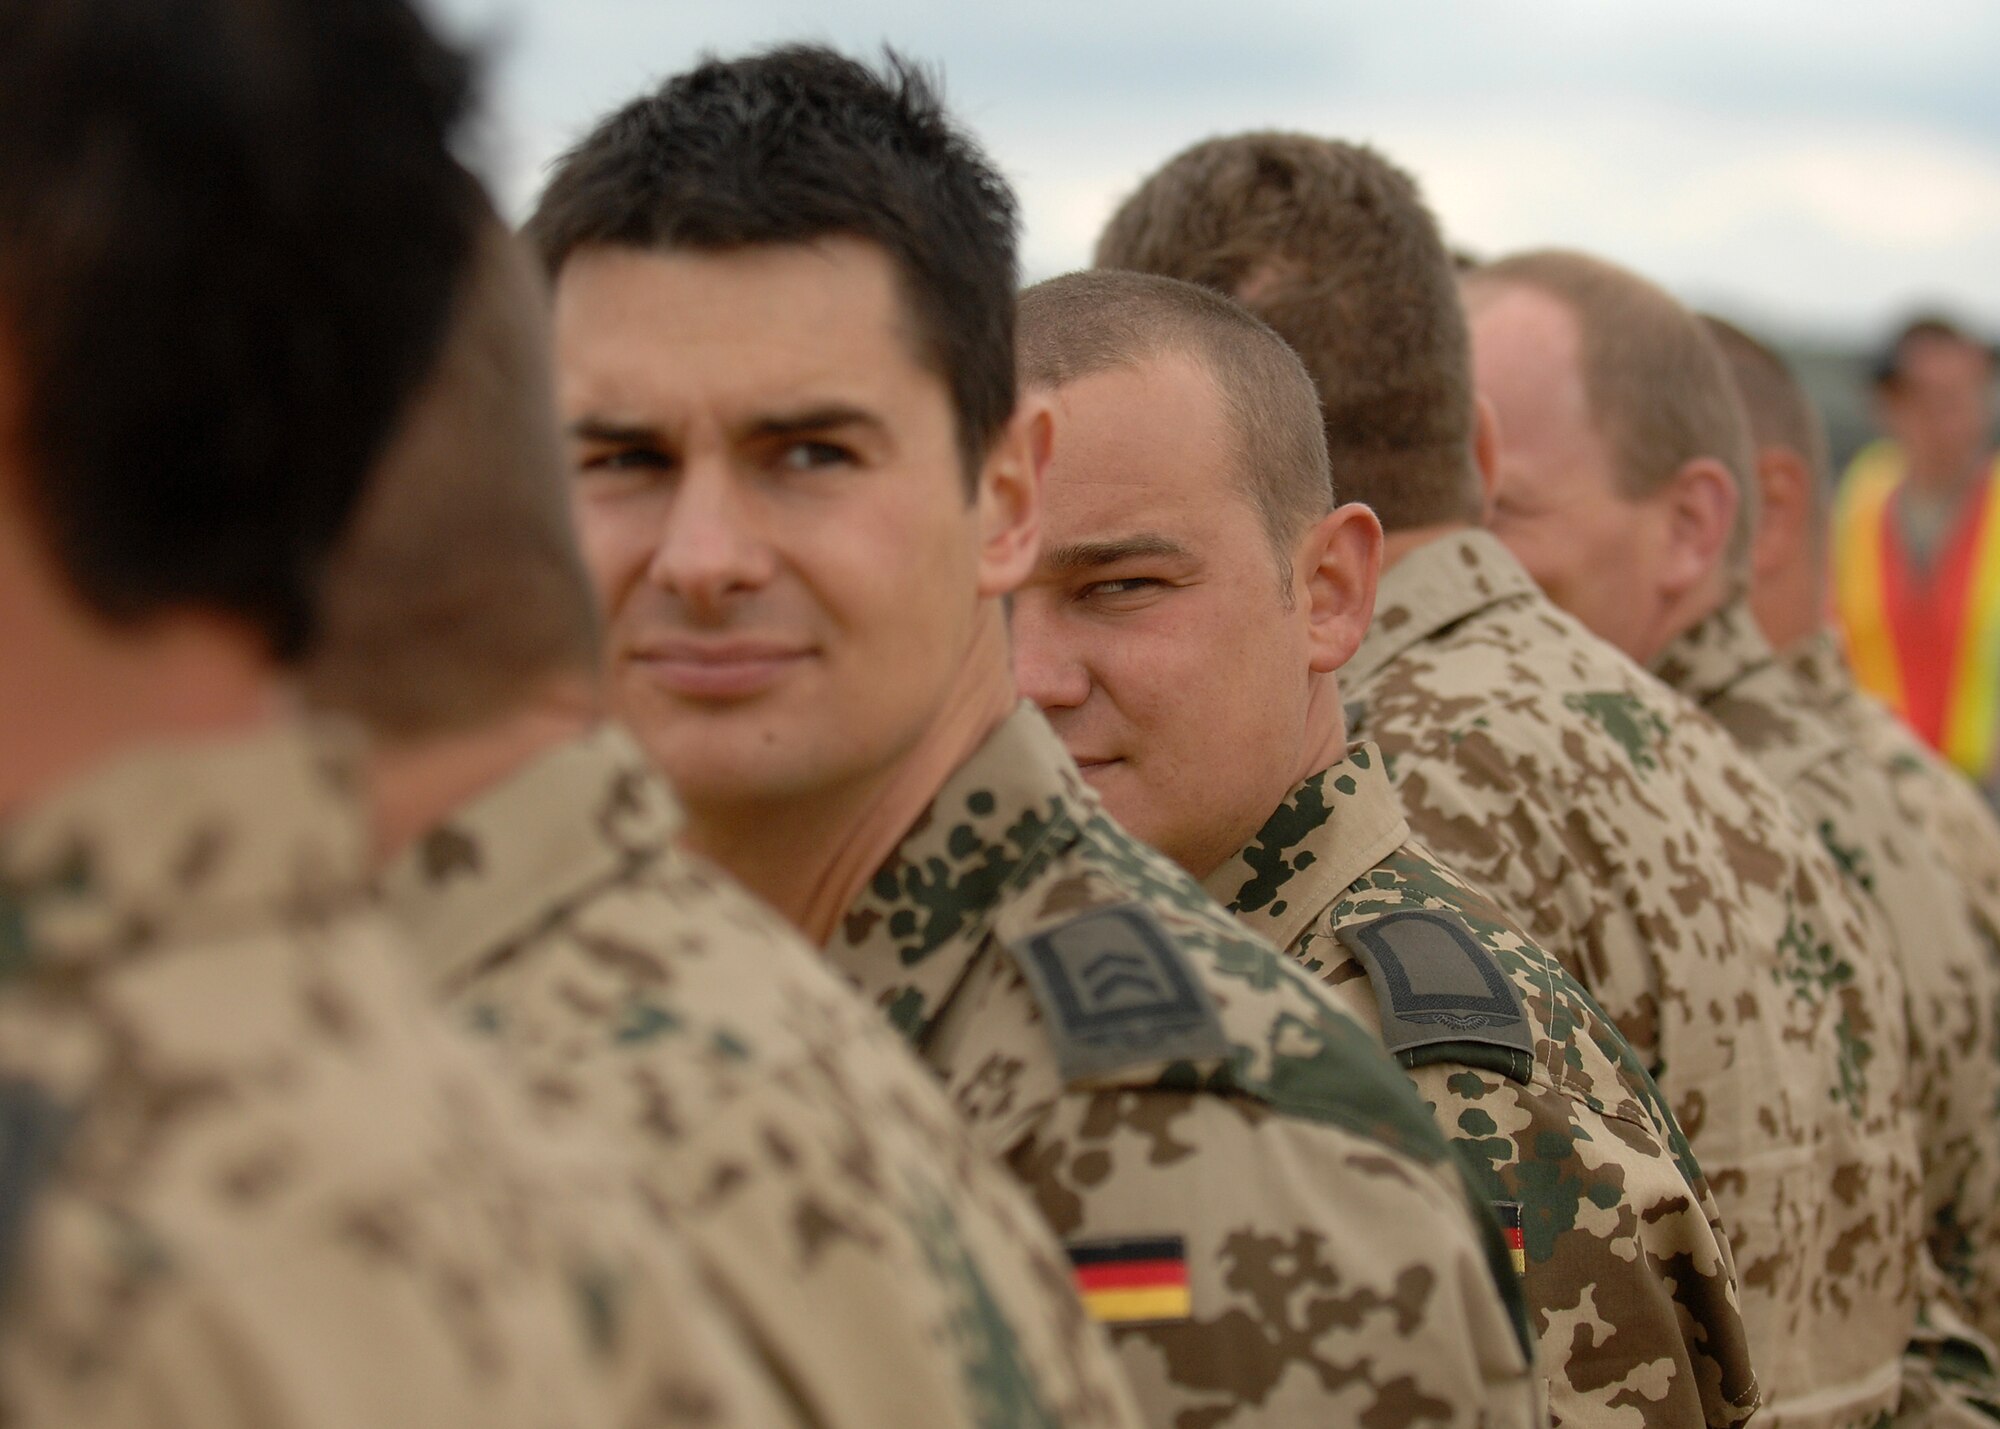 Two German Air Force members watch the arrival of their German C-130 Aircraft standing in formation during the international competitor arrivals for AMC Rodeo 2009, McChord AFB, WA, July 13, 2009. RODEO is an international combat skills and flying operations competition designed to develop and improve techniques and procedures with our international partners to enhance mobility operations (U.S. Air Force photo by SSgt Stephen Schester/Released)  